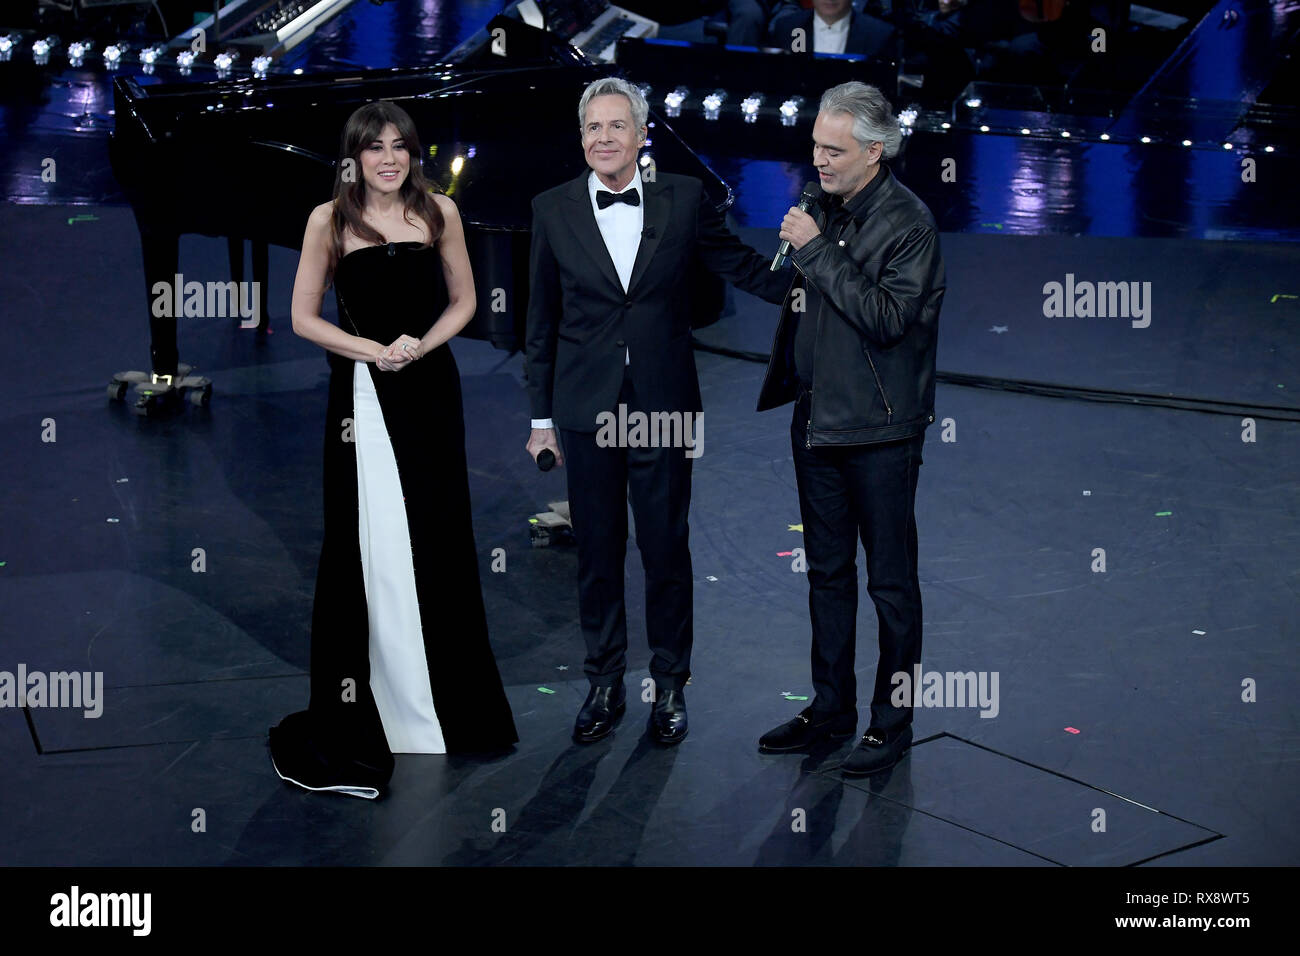 First evening of the 69th Annual Sanremo Festival of Italian Song held at Teatro Ariston of Sanremo  Featuring: Andrea Bocelli, Claudio Baglioni, Virginia Raffaele Where: Sanremo, Italy When: 05 Feb 2019 Credit: IPA/WENN.com  **Only available for publication in UK, USA, Germany, Austria, Switzerland** Stock Photo